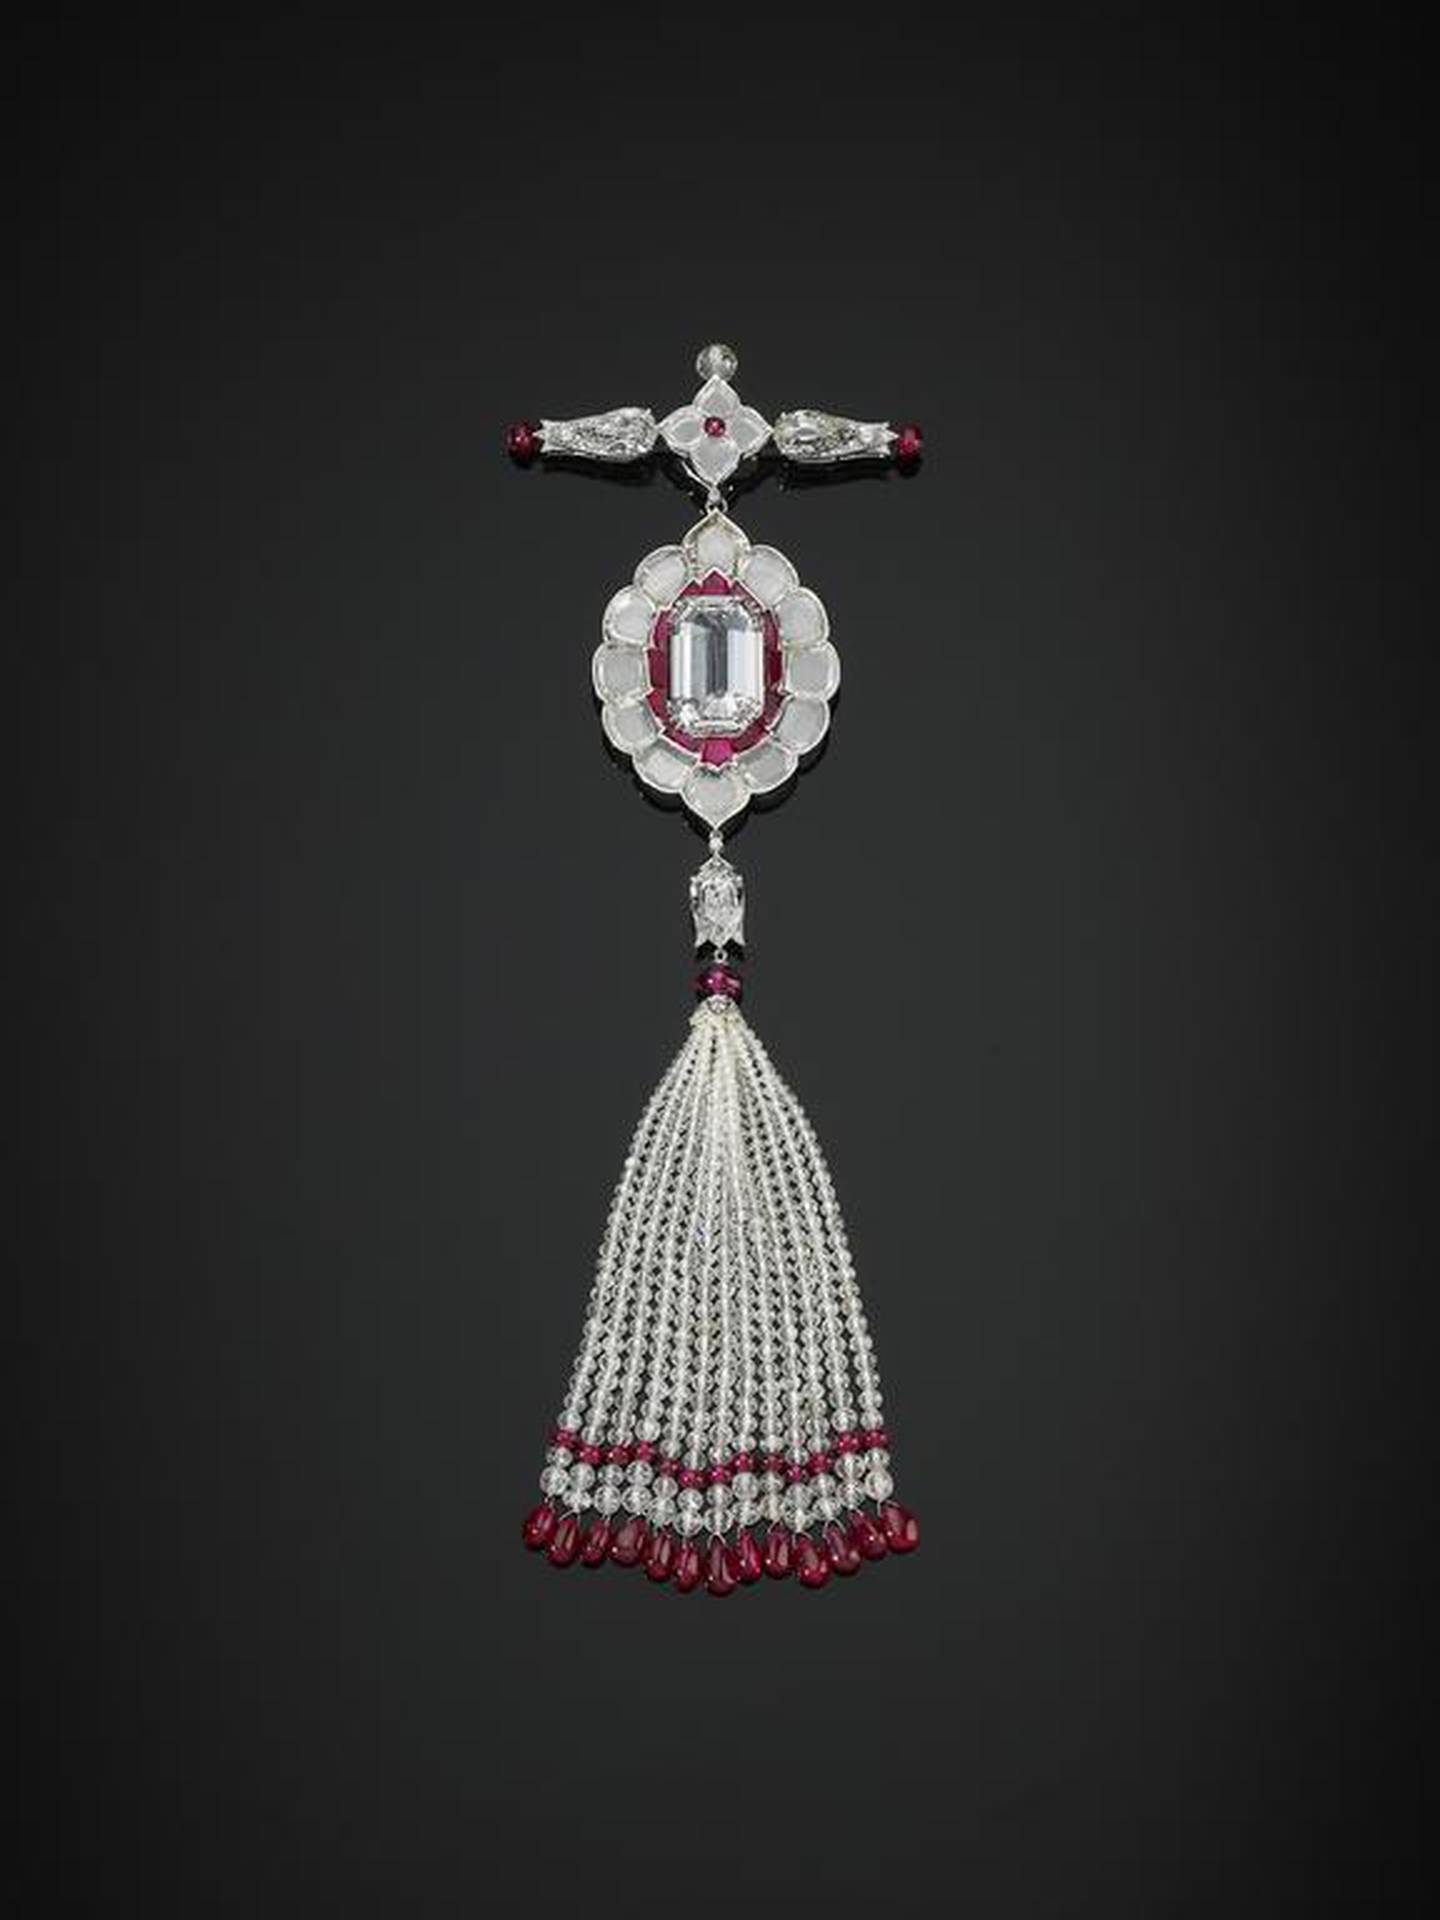 A old pendant brooch from India set with diamonds and rubies. Prudence Cuming Associates